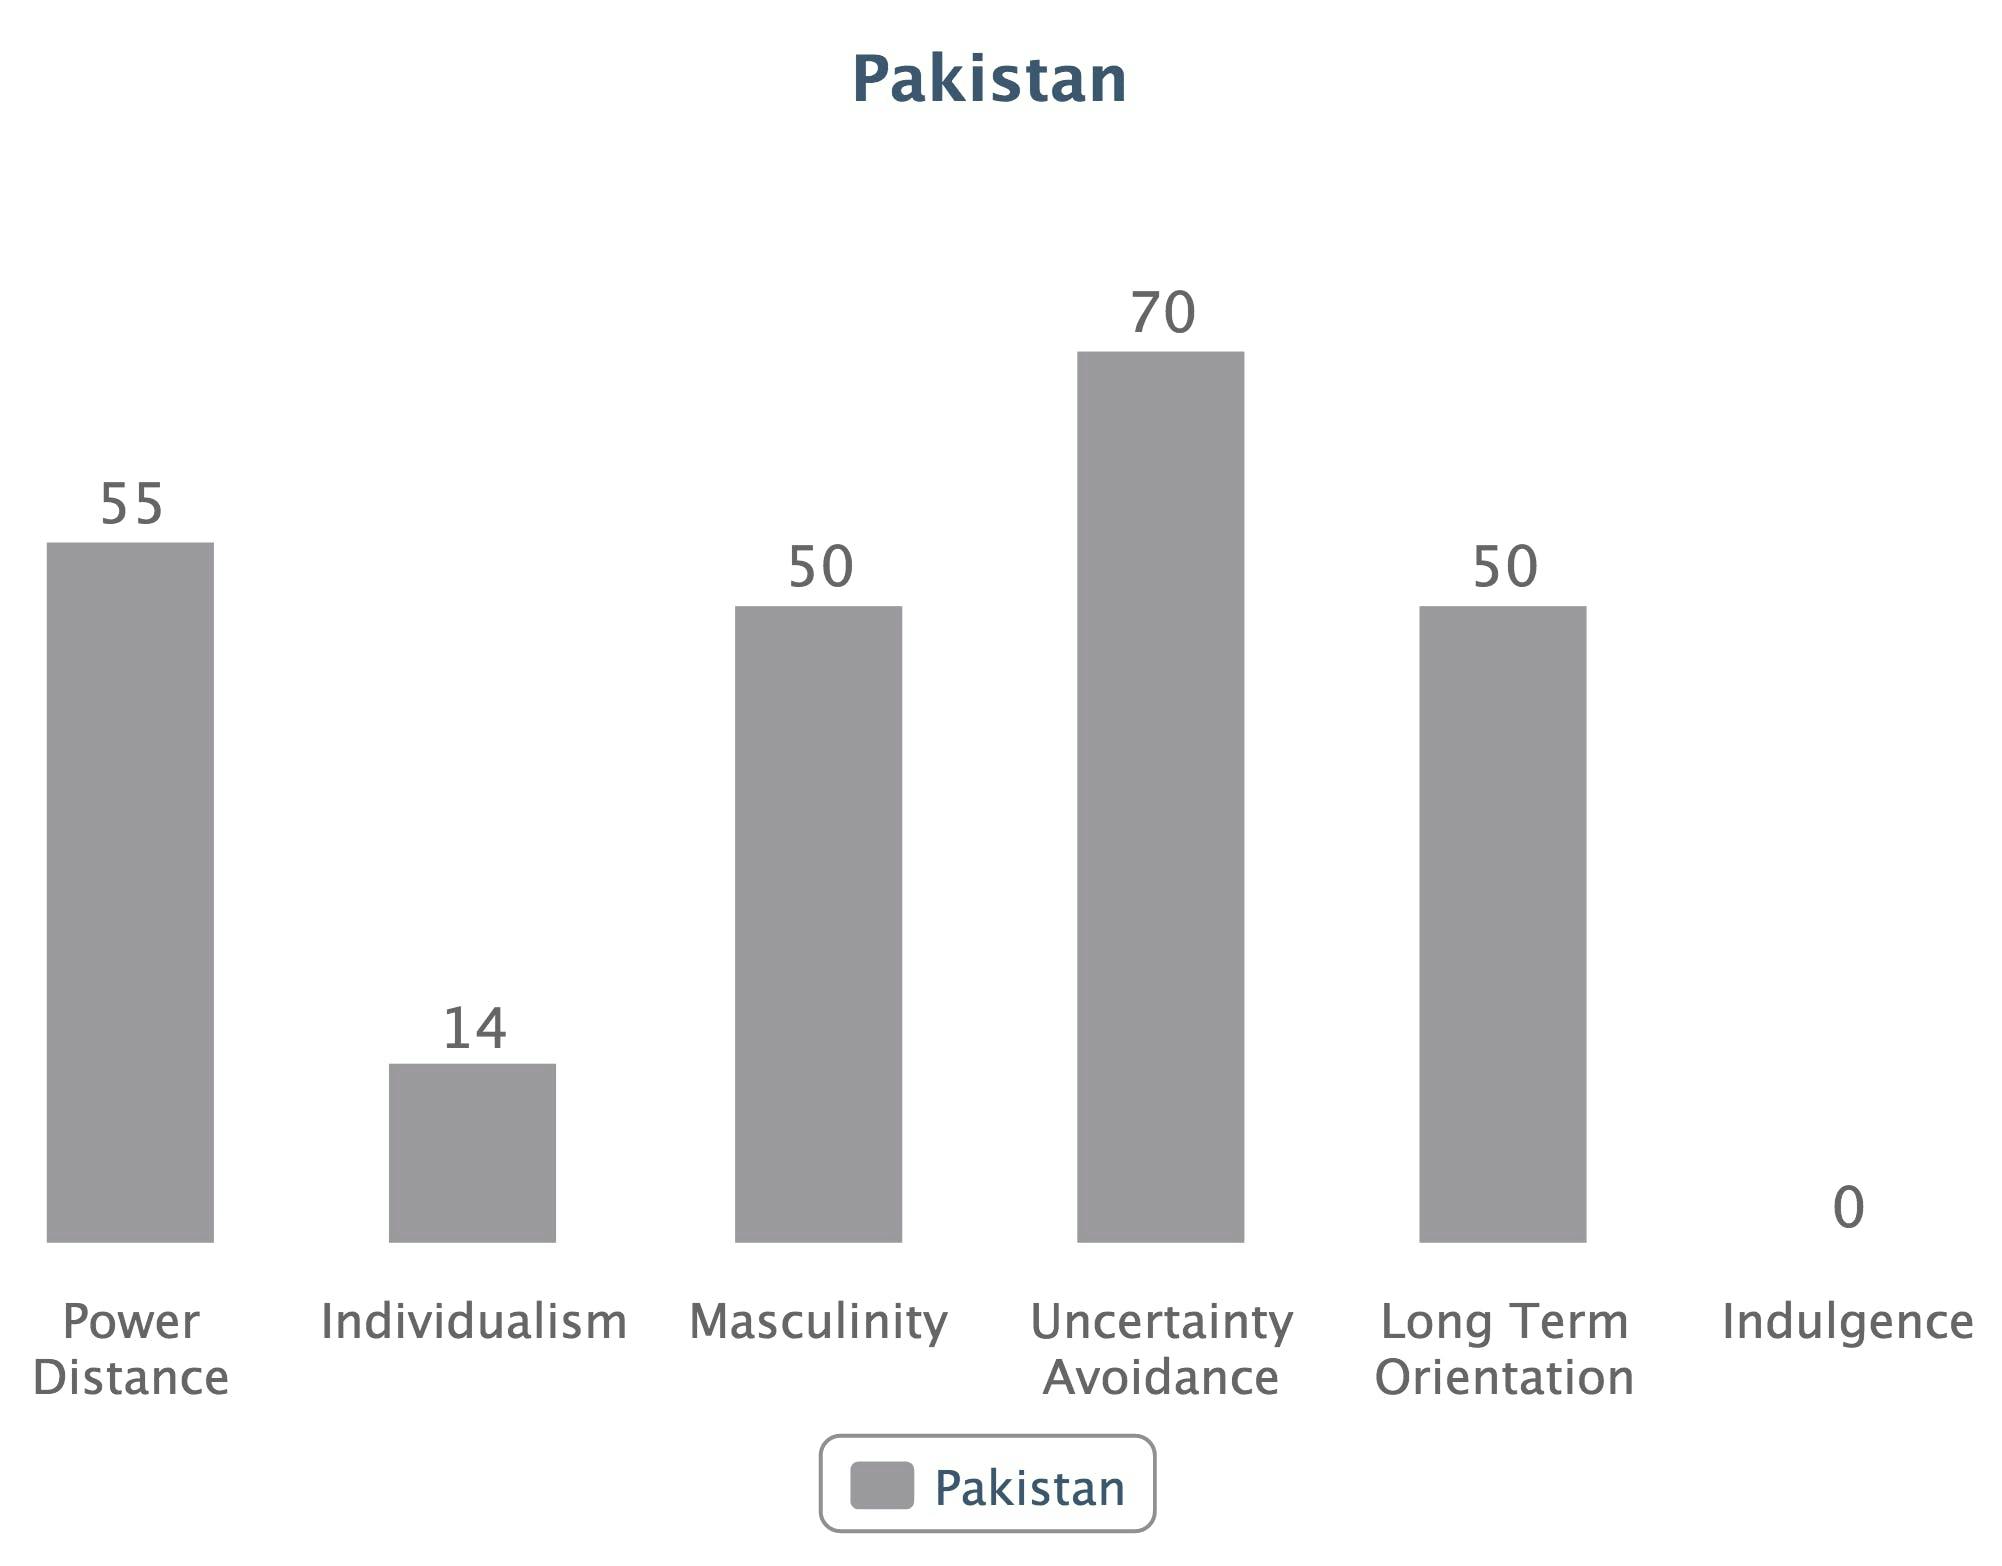 Long Term Orientation in Pakistan: from Zero to 50 in 2 years